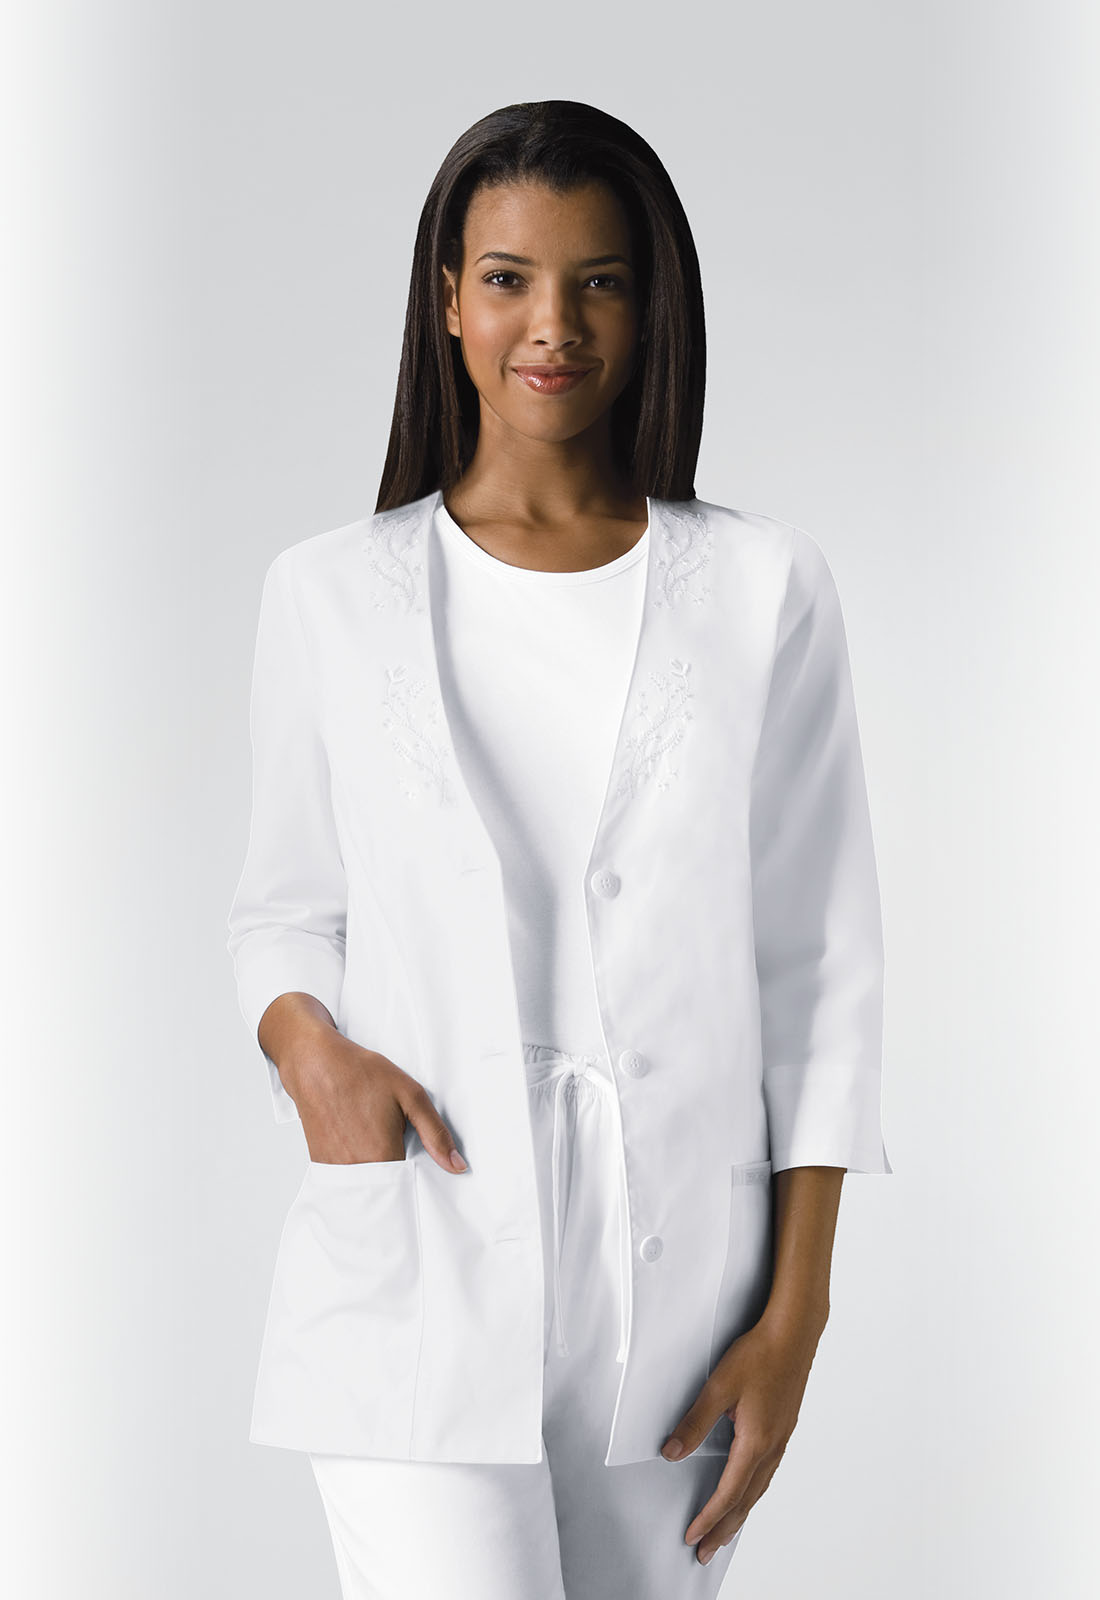 Cherokee Medical Medical Professional Whites 3/4 Sleeve Embroidered Jacket-Cherokee